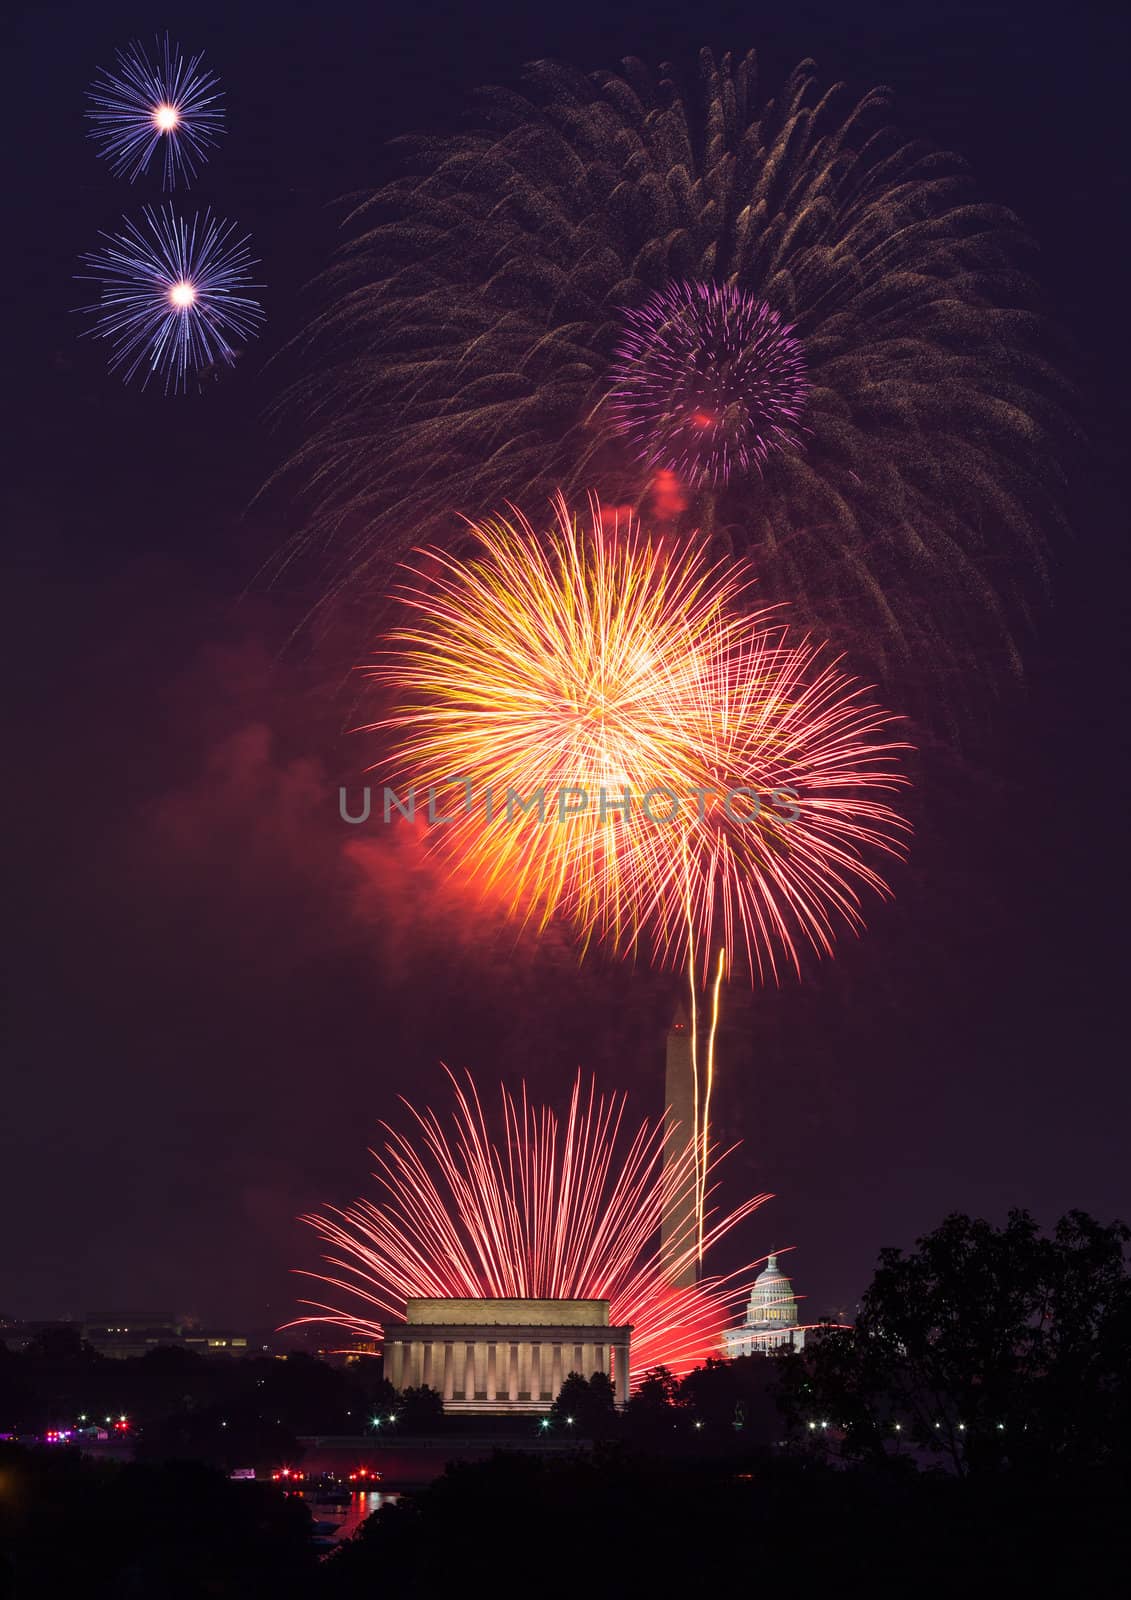 Fireworks over Washington DC on July 4th by steheap